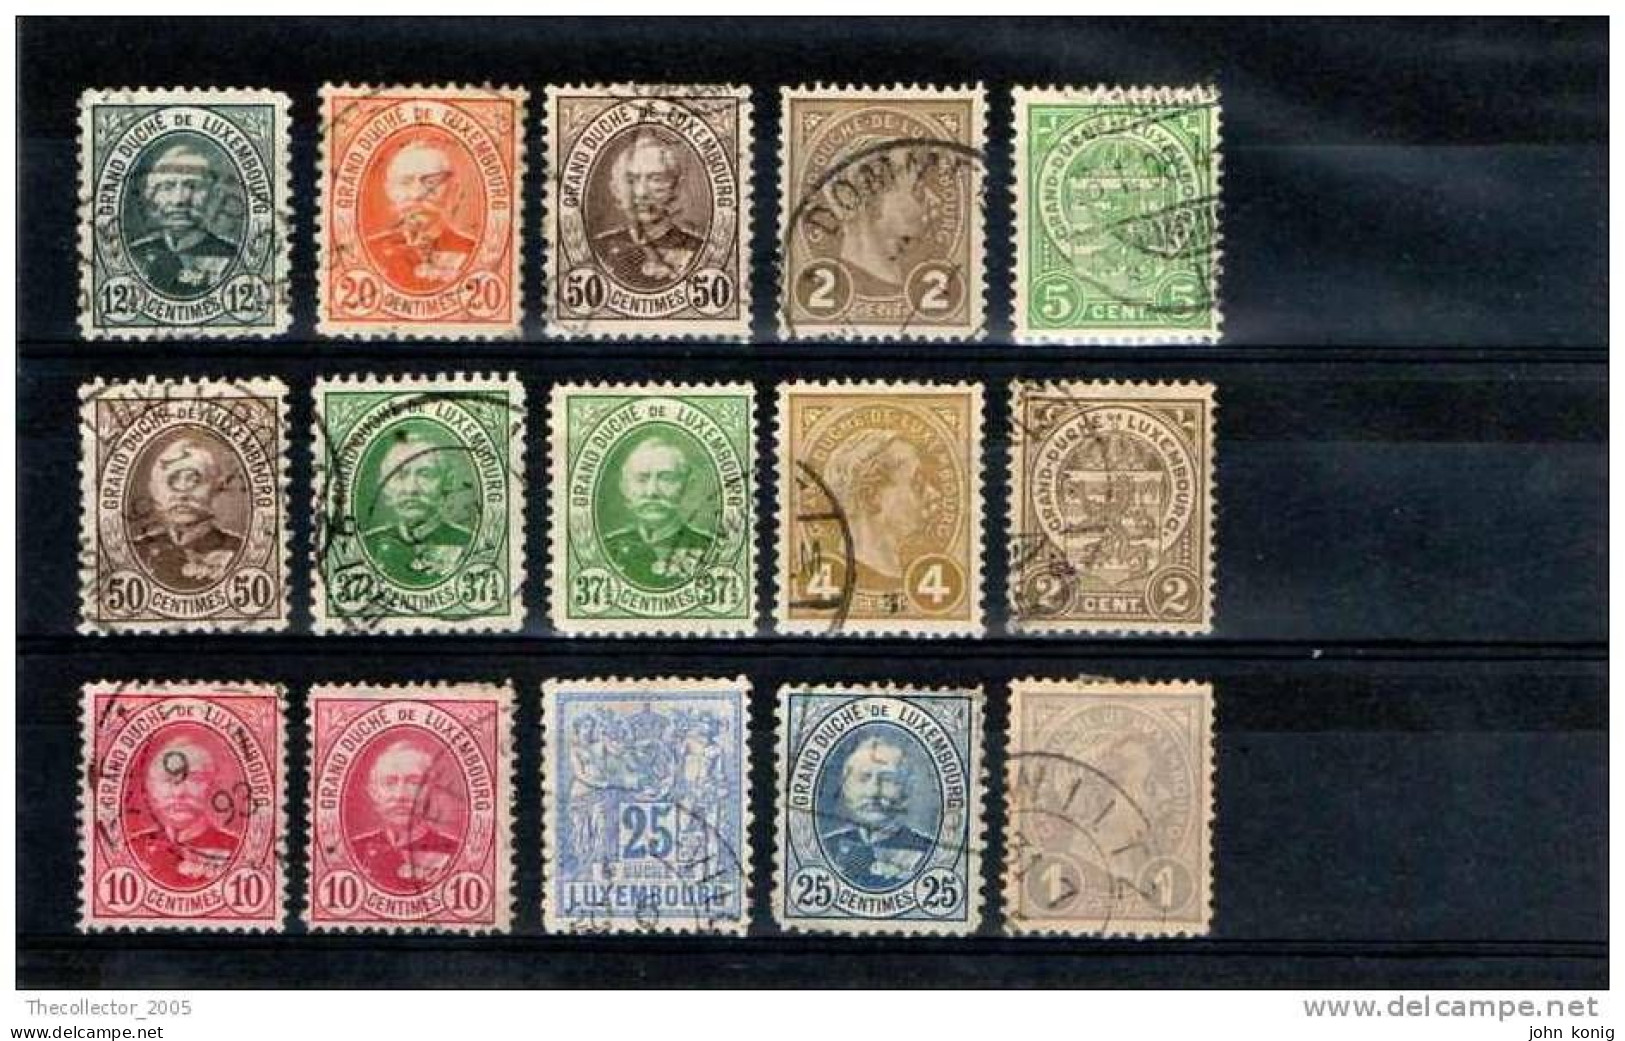 Luxembourg - Lussemburgo - Stamps Lot Used - Gestempeld - Francobolli Lotto Usati - Collections